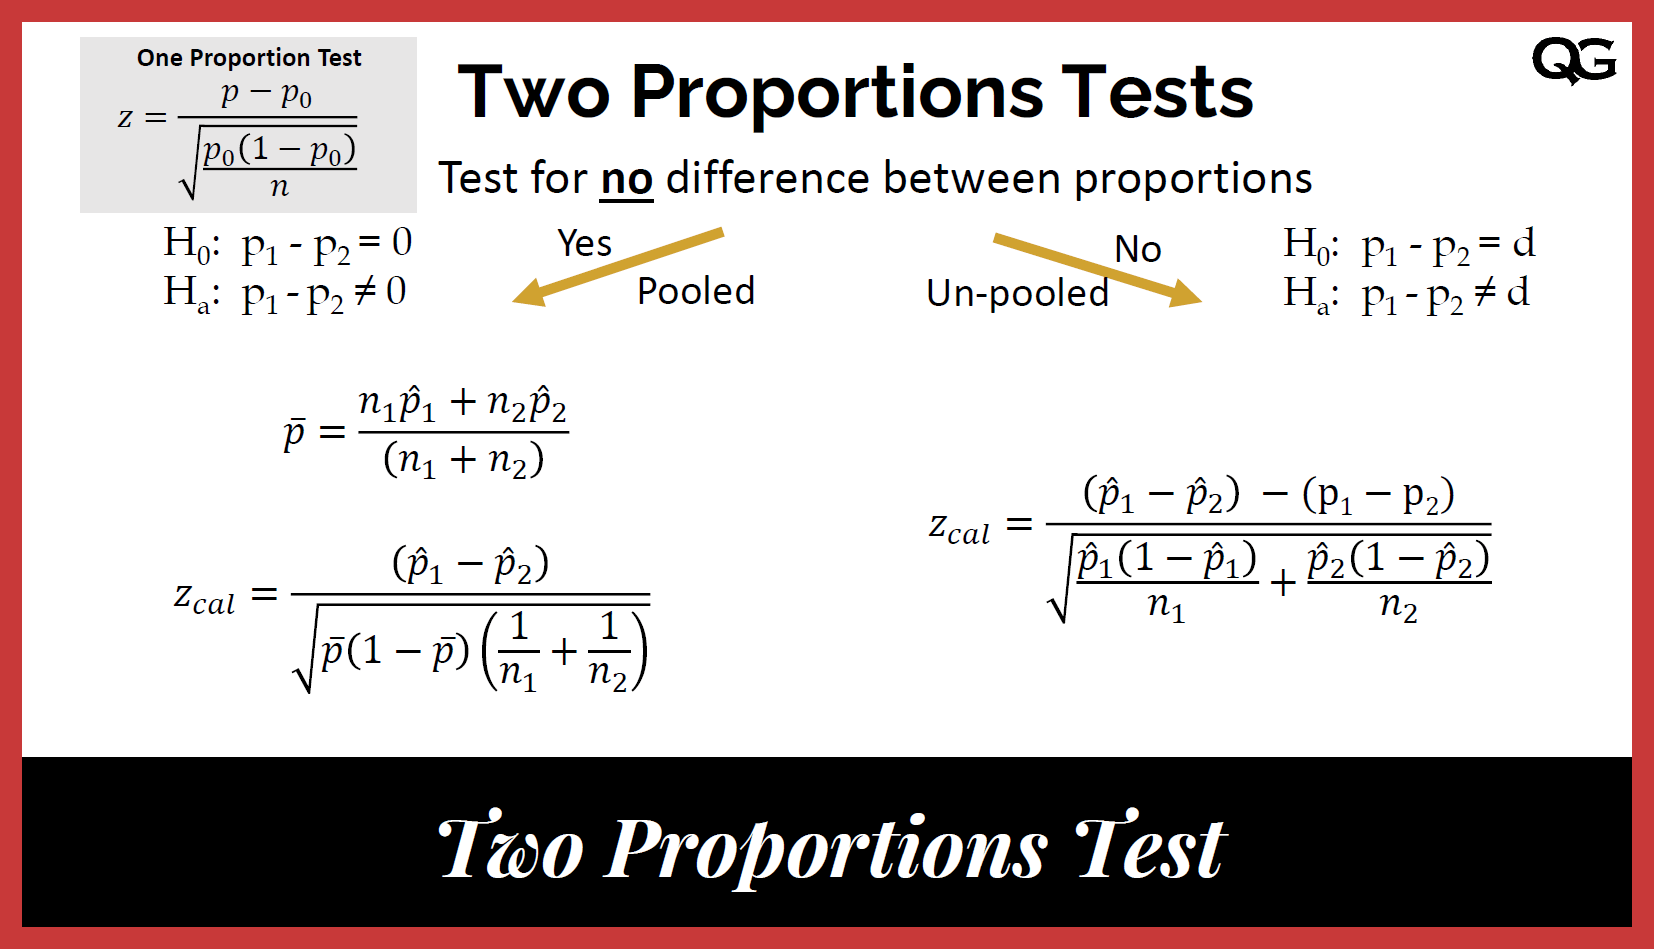 Two Proportions Z Test or Two Sample Z Test for Proportions